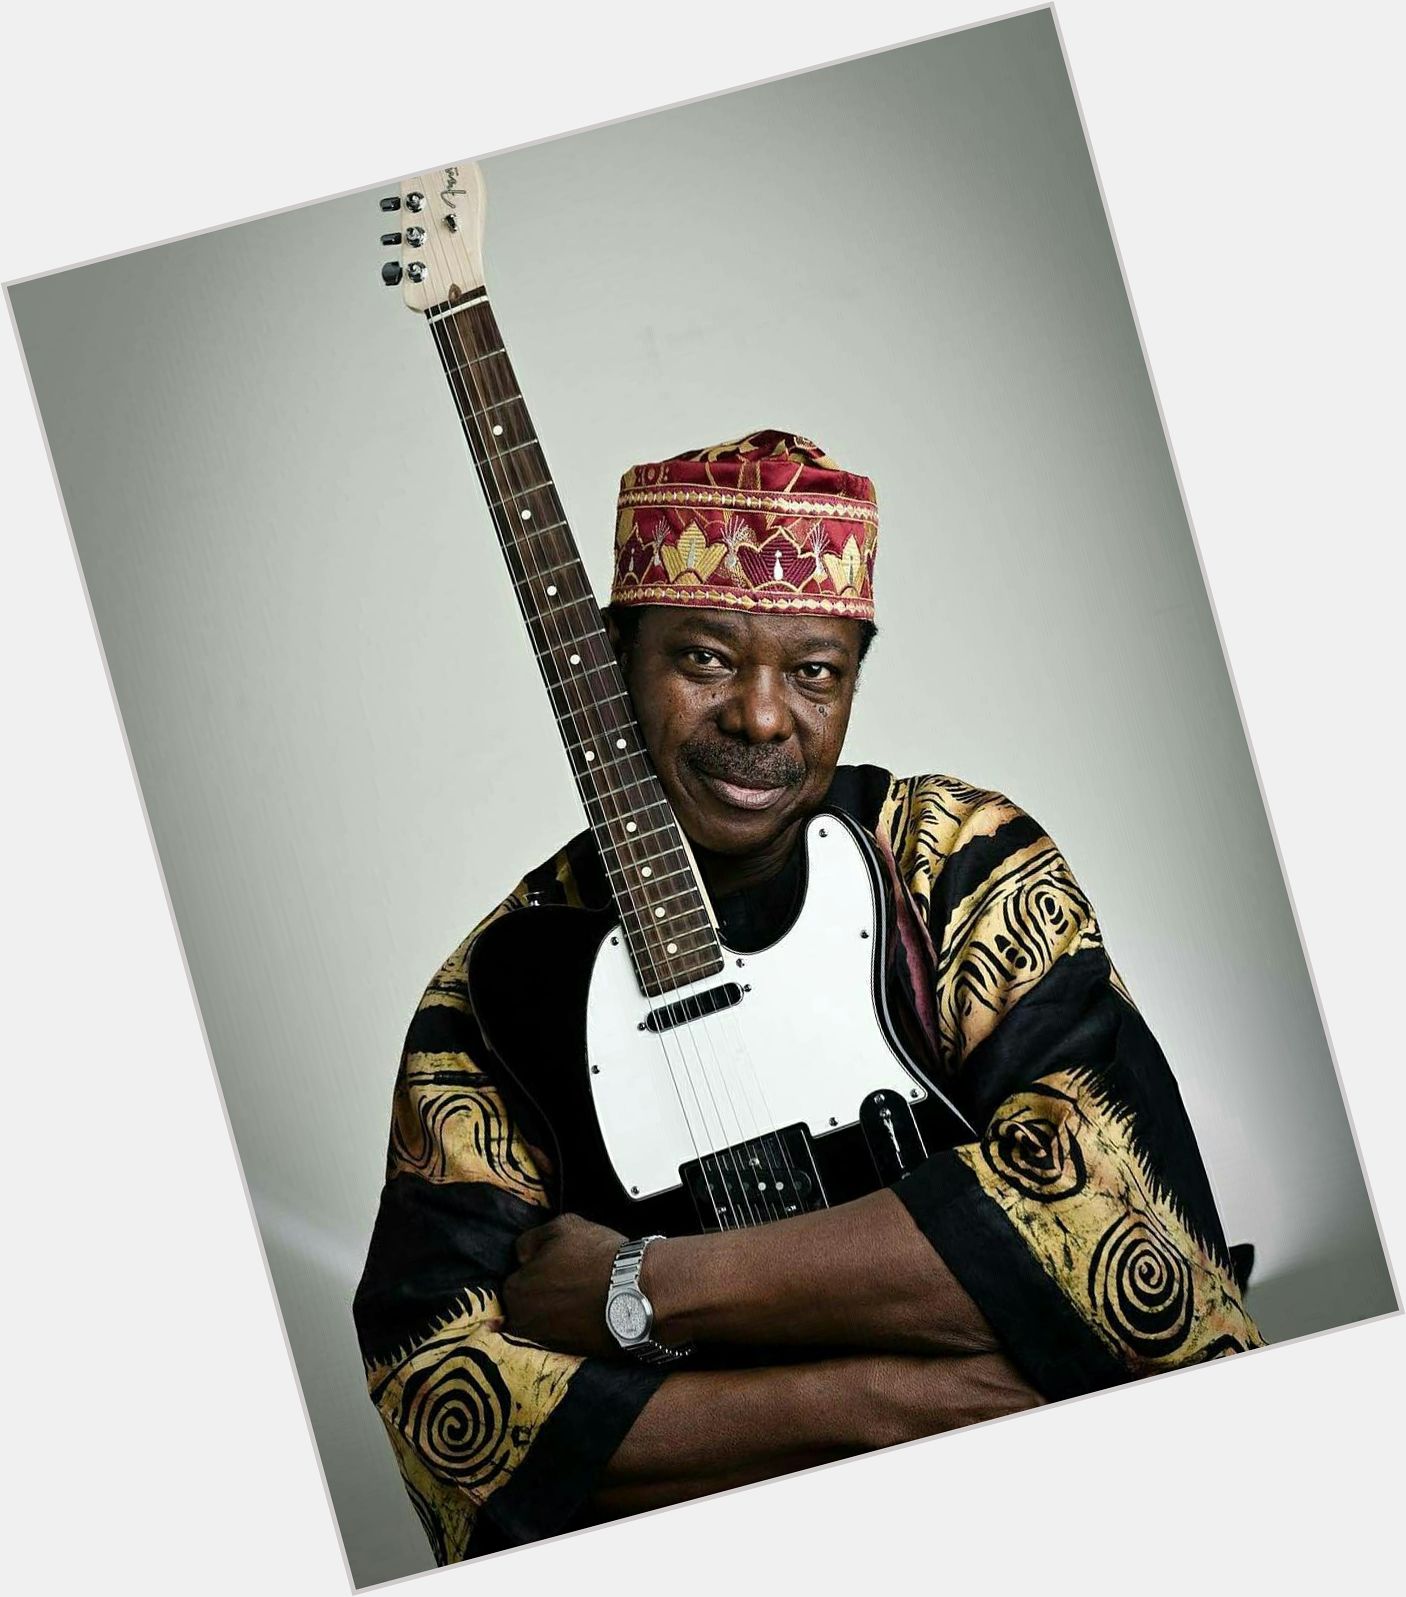 Http://fanpagepress.net/m/K/King Sunny Ade New Pic 1